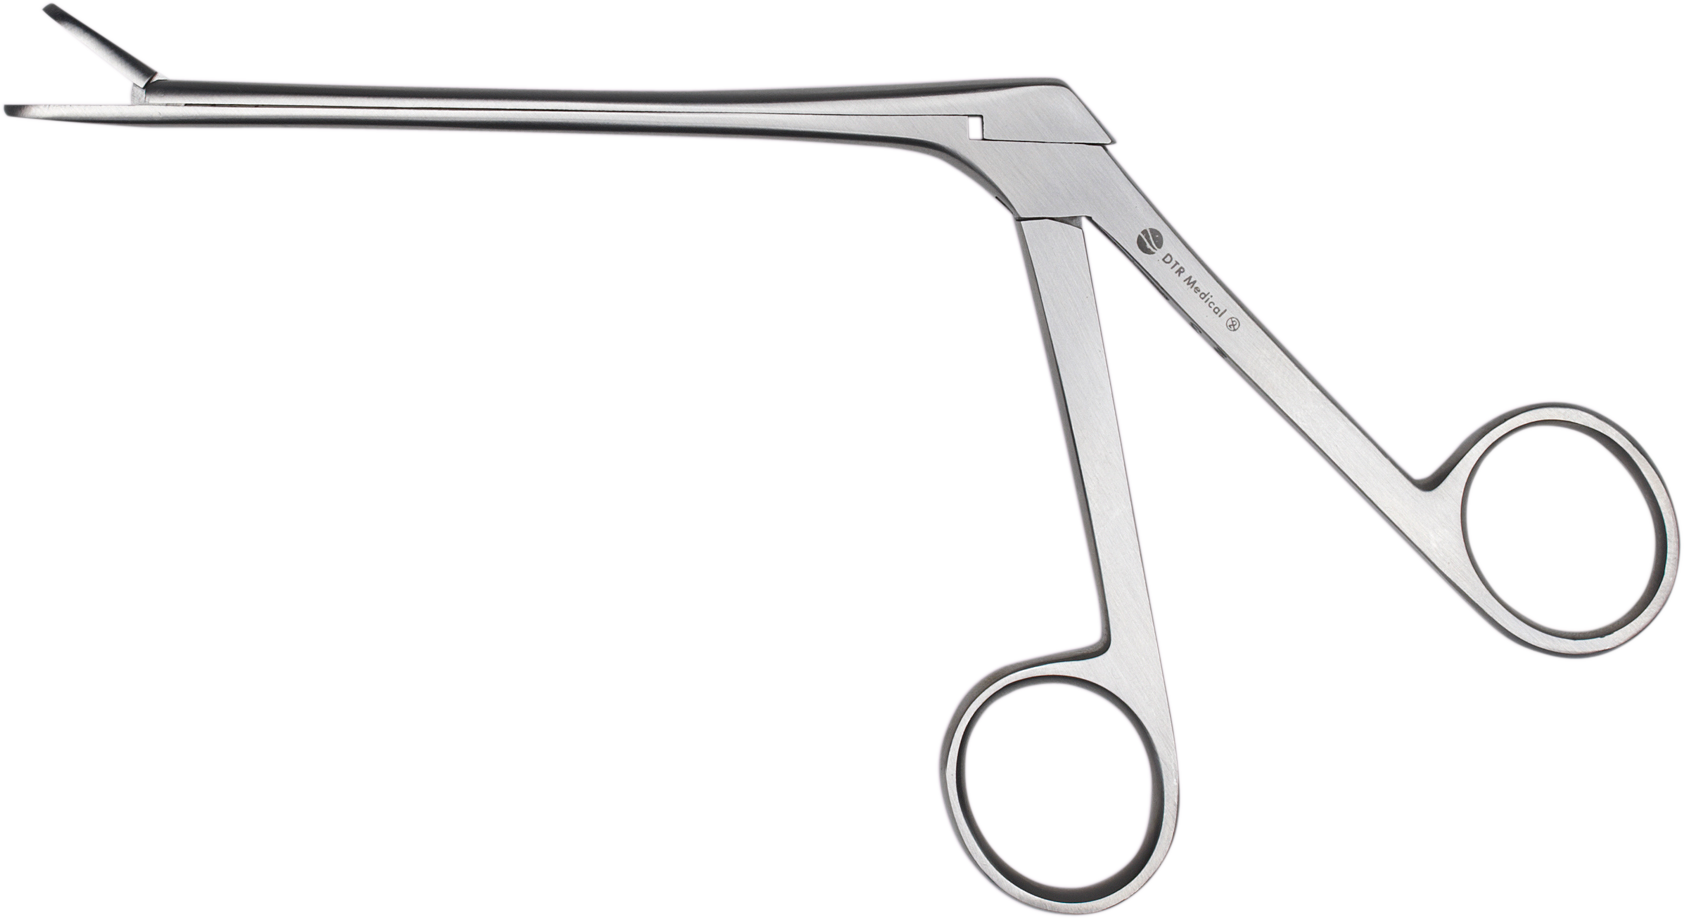 disposable surgical instruments